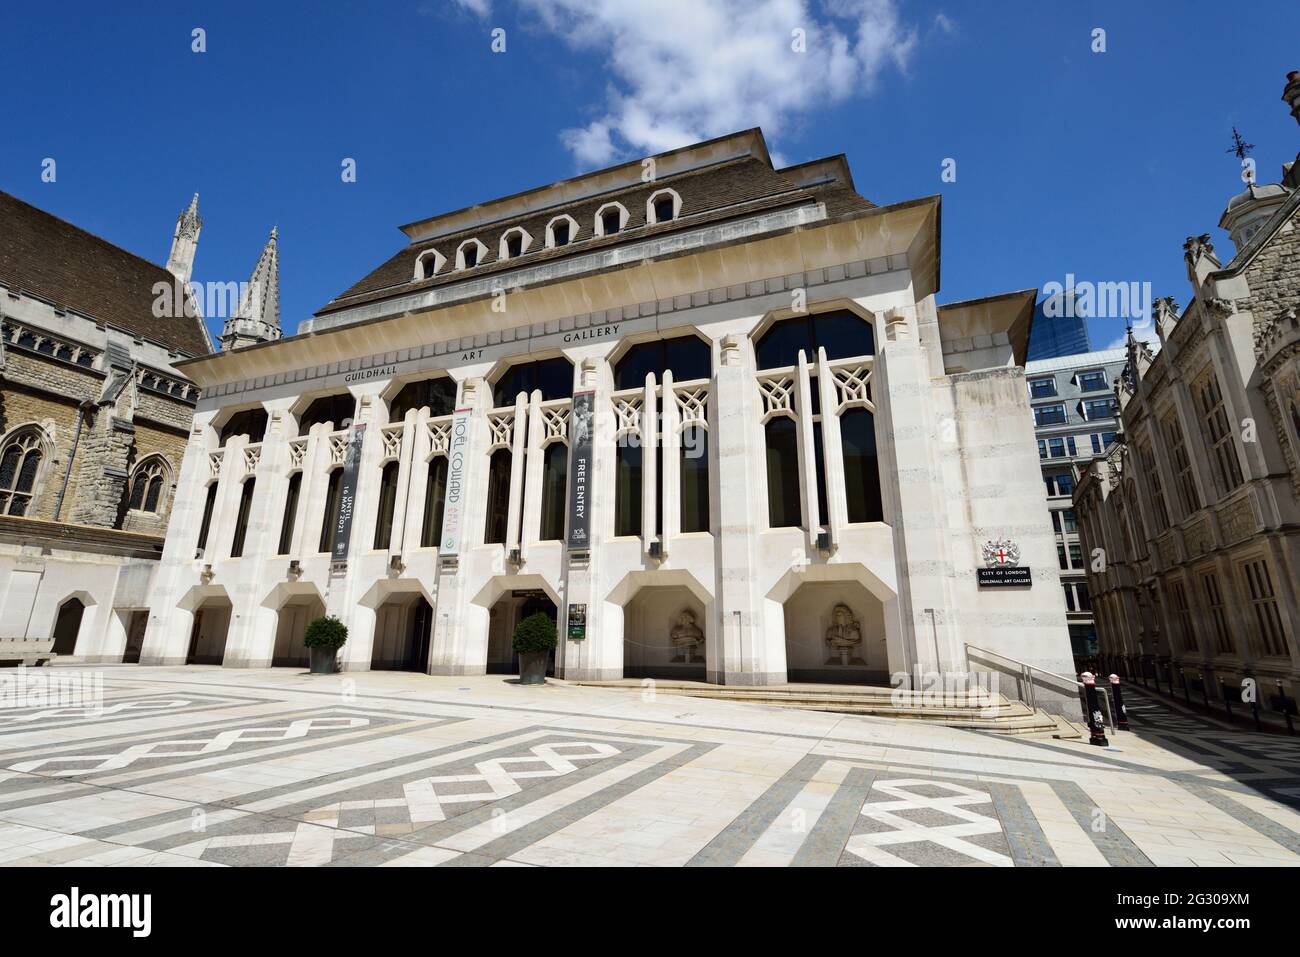 Guildhall Art Gallery, Guildhall Yard, city of London, United Kingdom Stock Photo